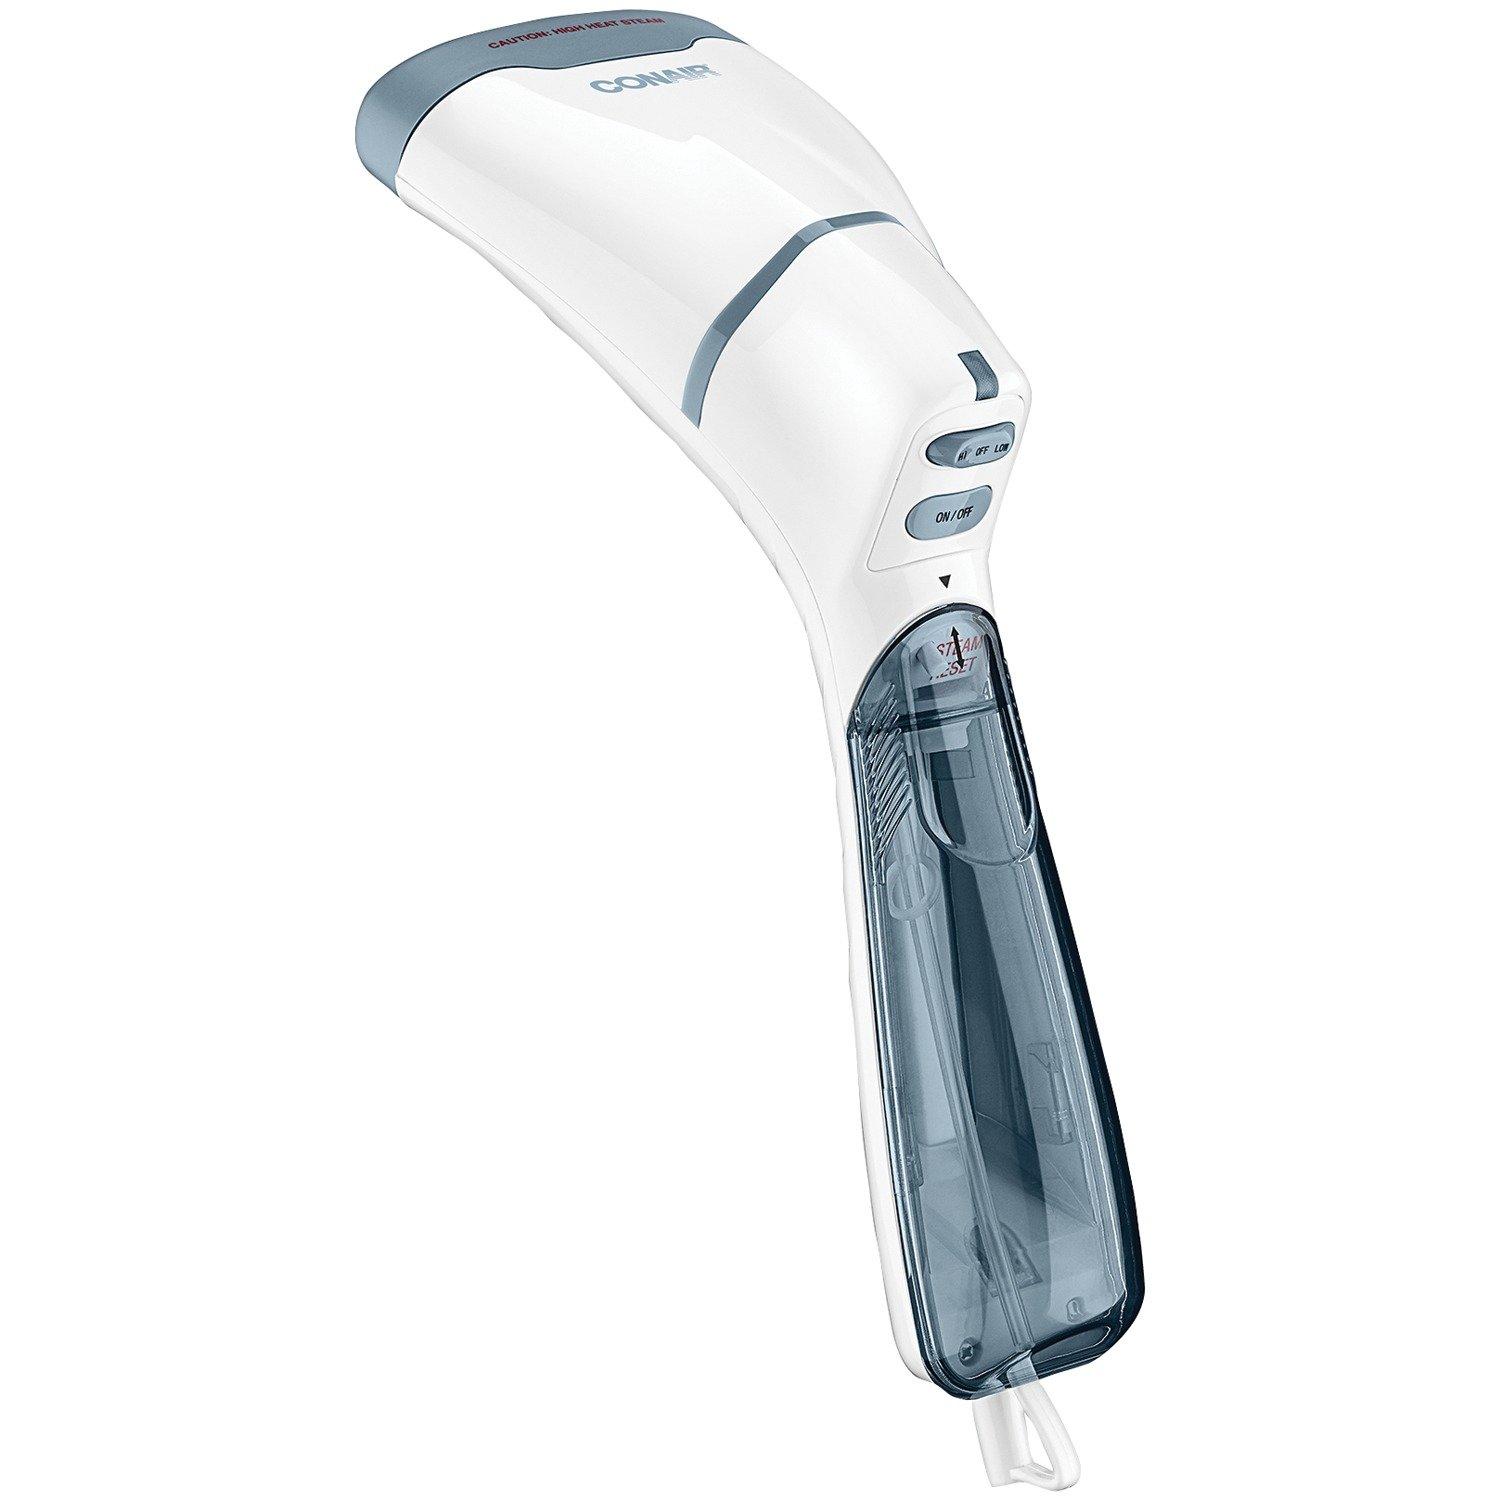 CONAIR® GS32 EXTREMESTEAM® FABRIC STEAMER WITH ADVANCED HEAT TECHNOLOGY